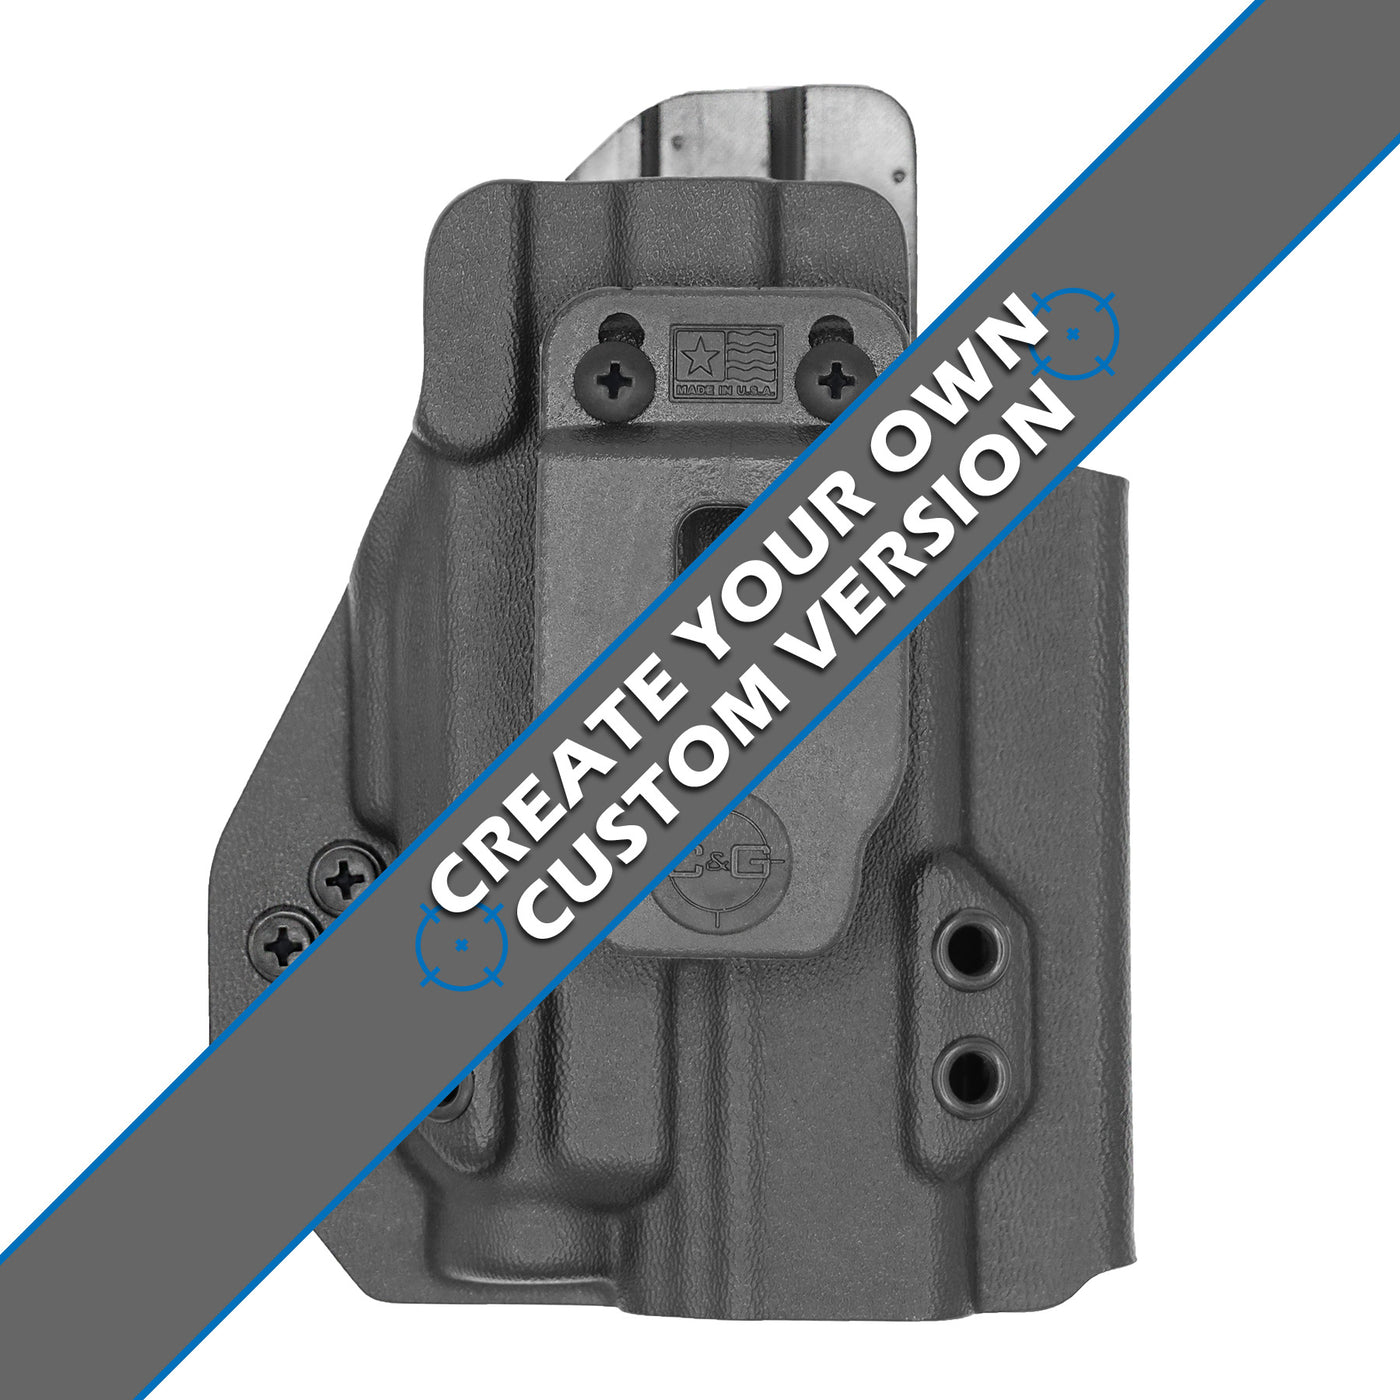 C&G Holsters custom IWB Tactical Poly80 c/v2 Streamlight tlr7/a